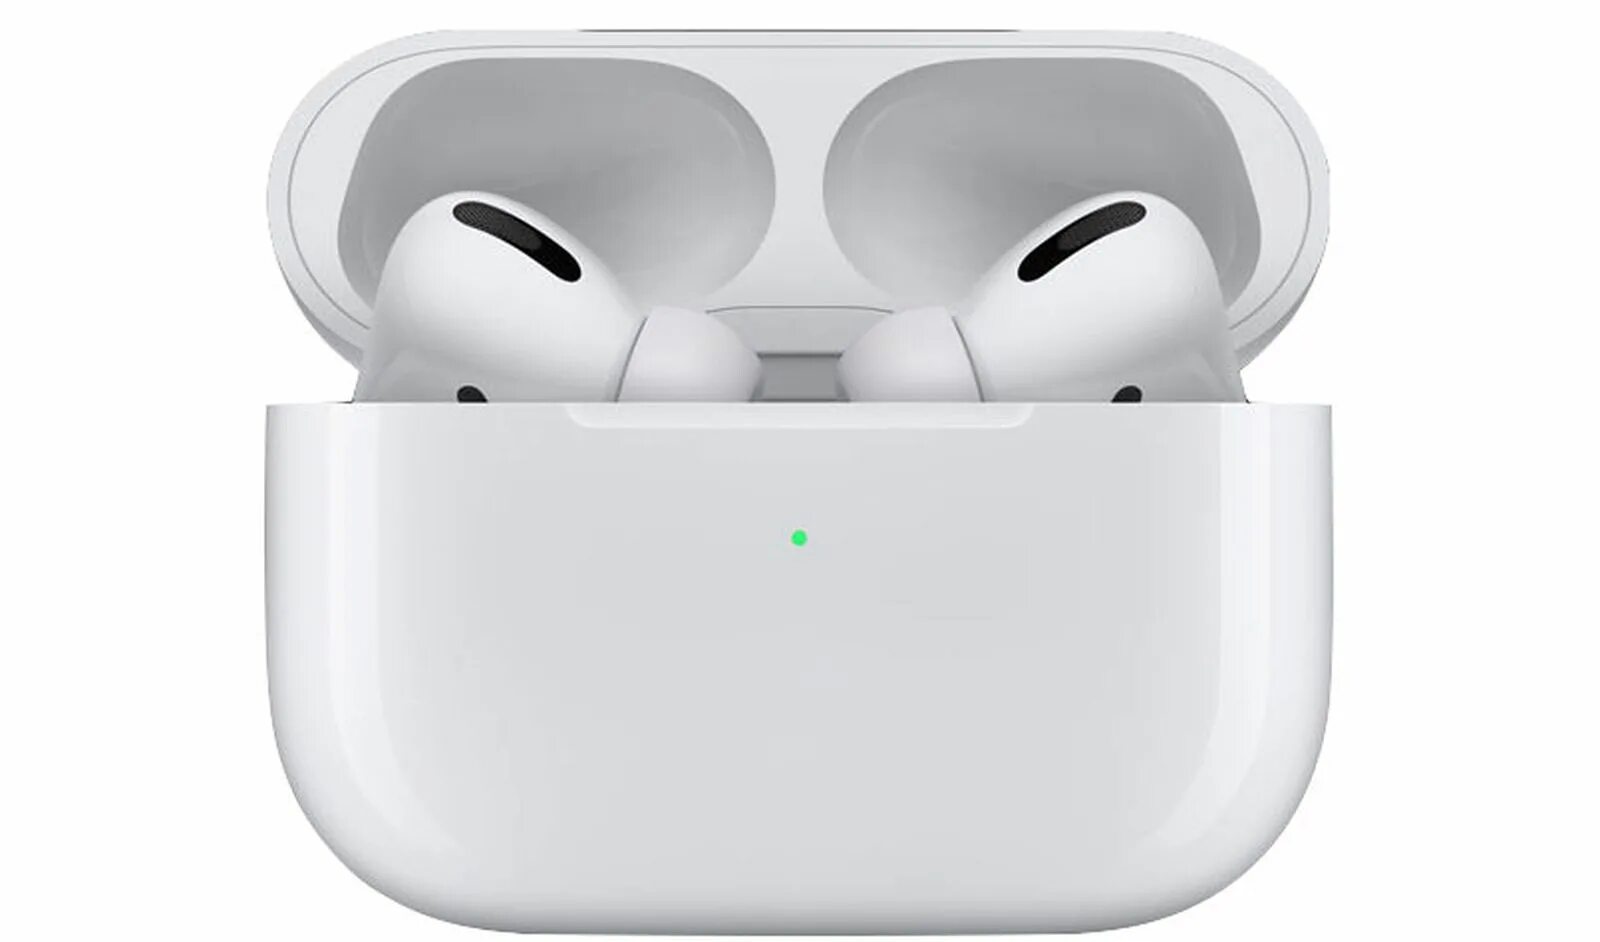 Airpods 15. Apple AIRPODS Pro. AIRPODS Pro 2. Беспроводные наушники Apple AIRPODS 3. Беспроводные наушники Apple AIRPODS (2019).